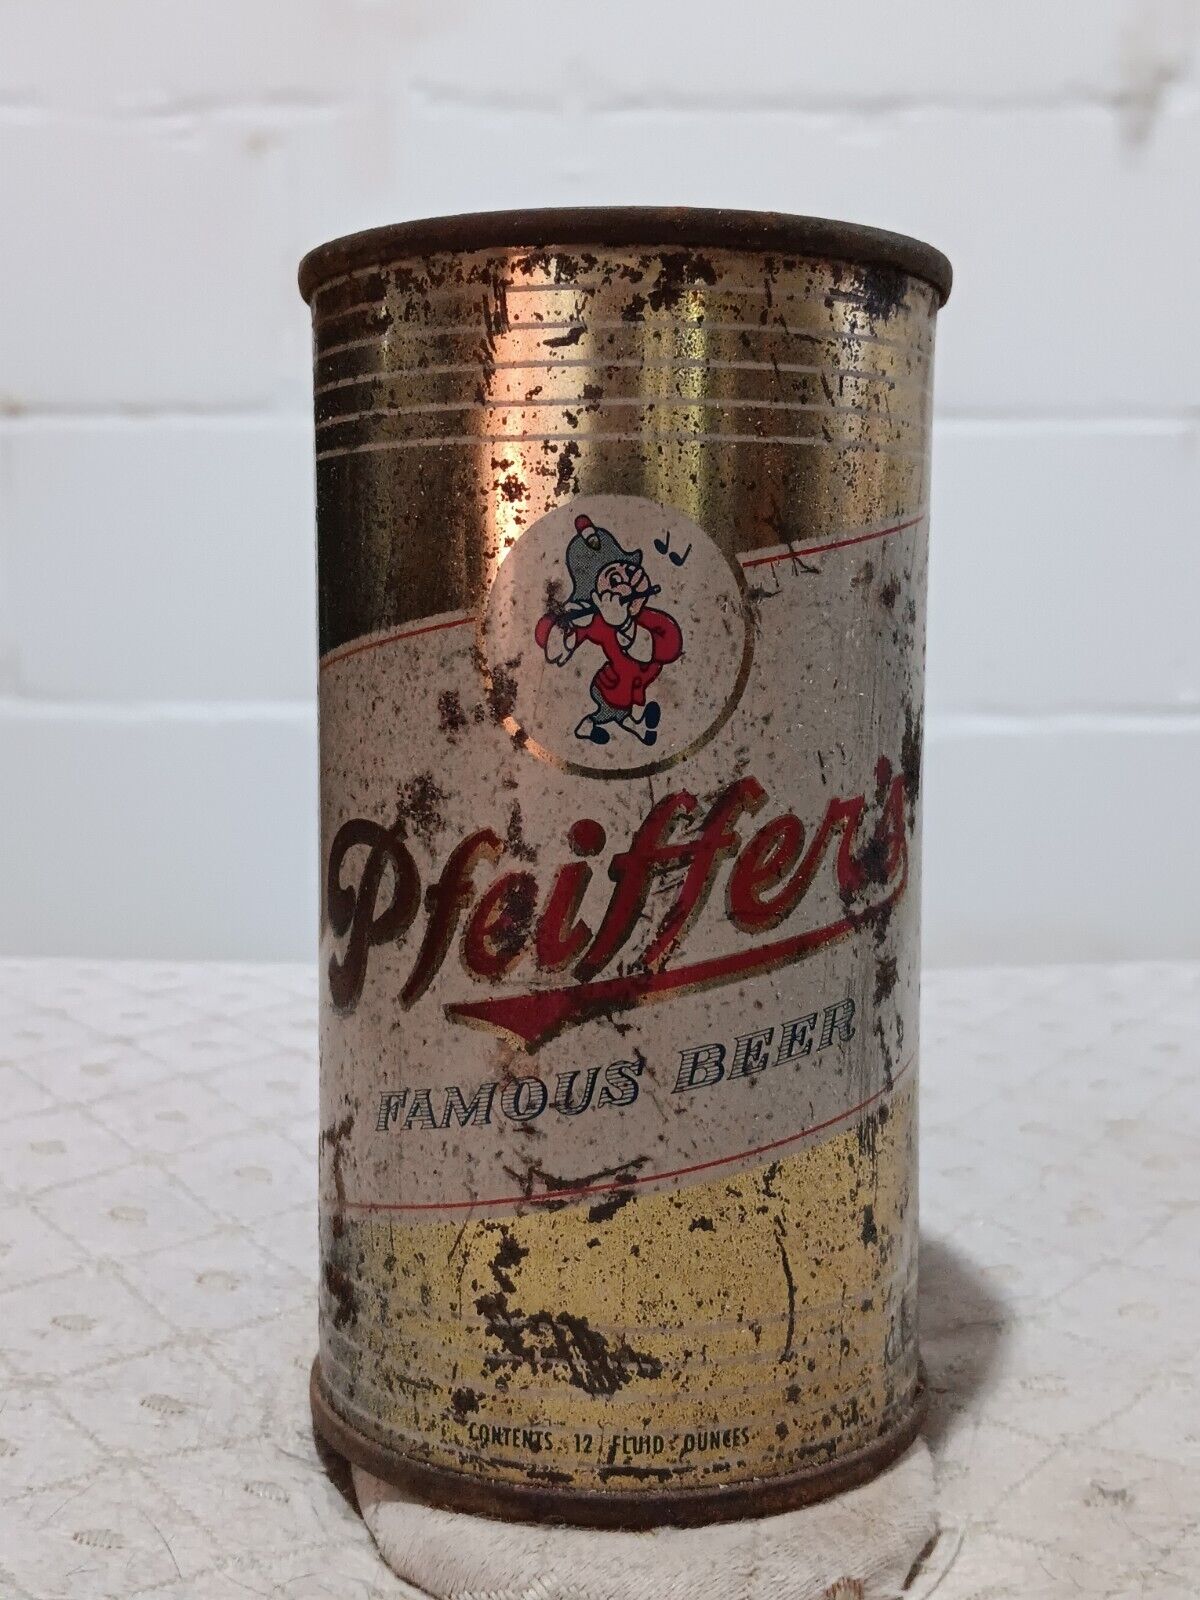 Pfeiffers Famous Beer flat top can